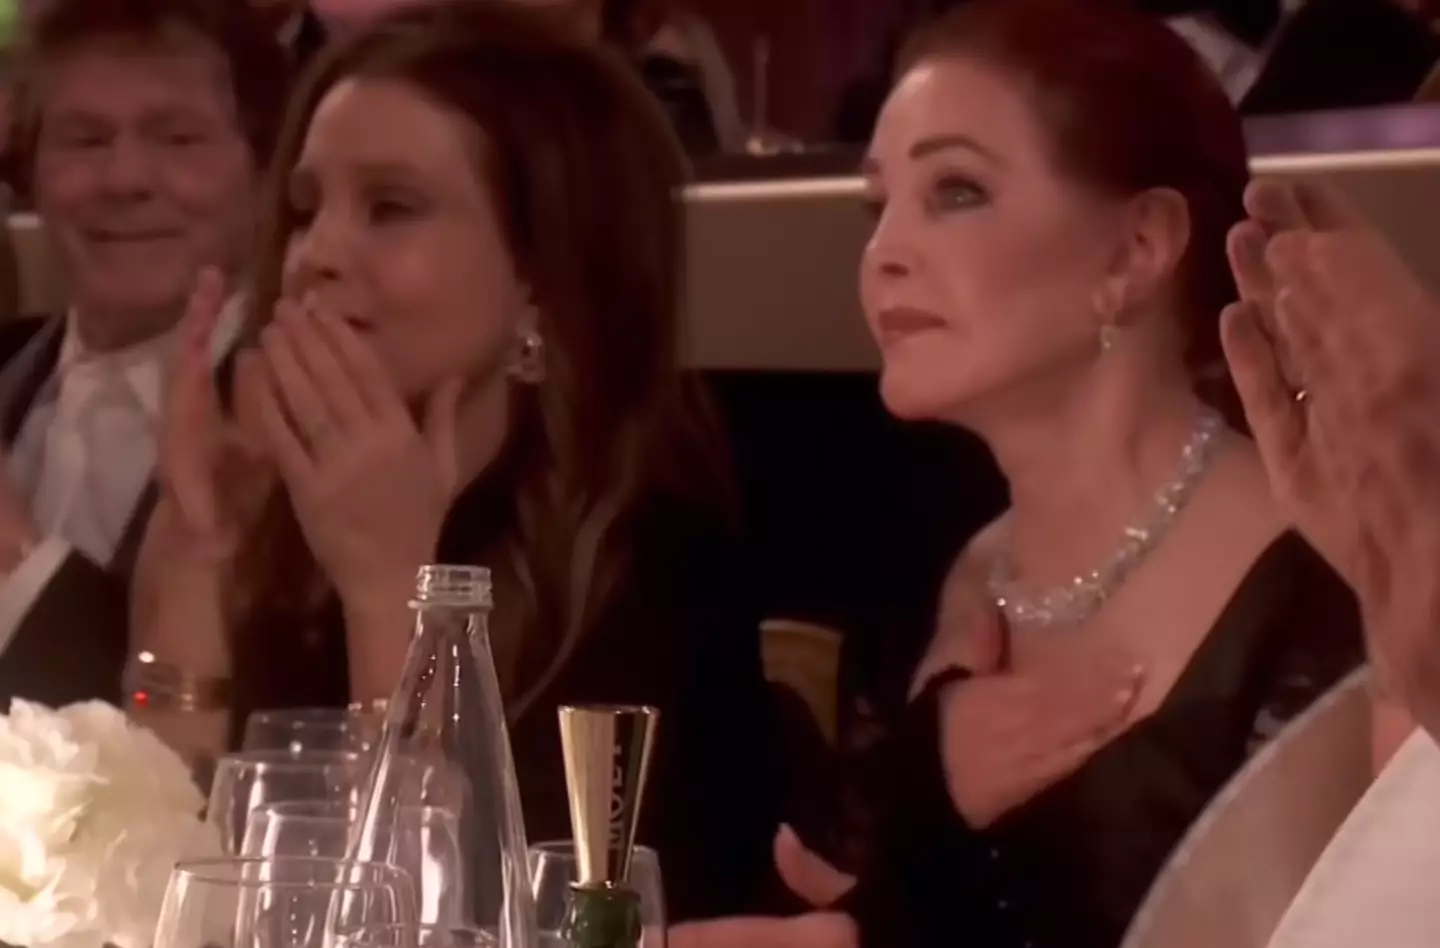 Lisa Marie and Priscilla looked touched by Butler's comments.